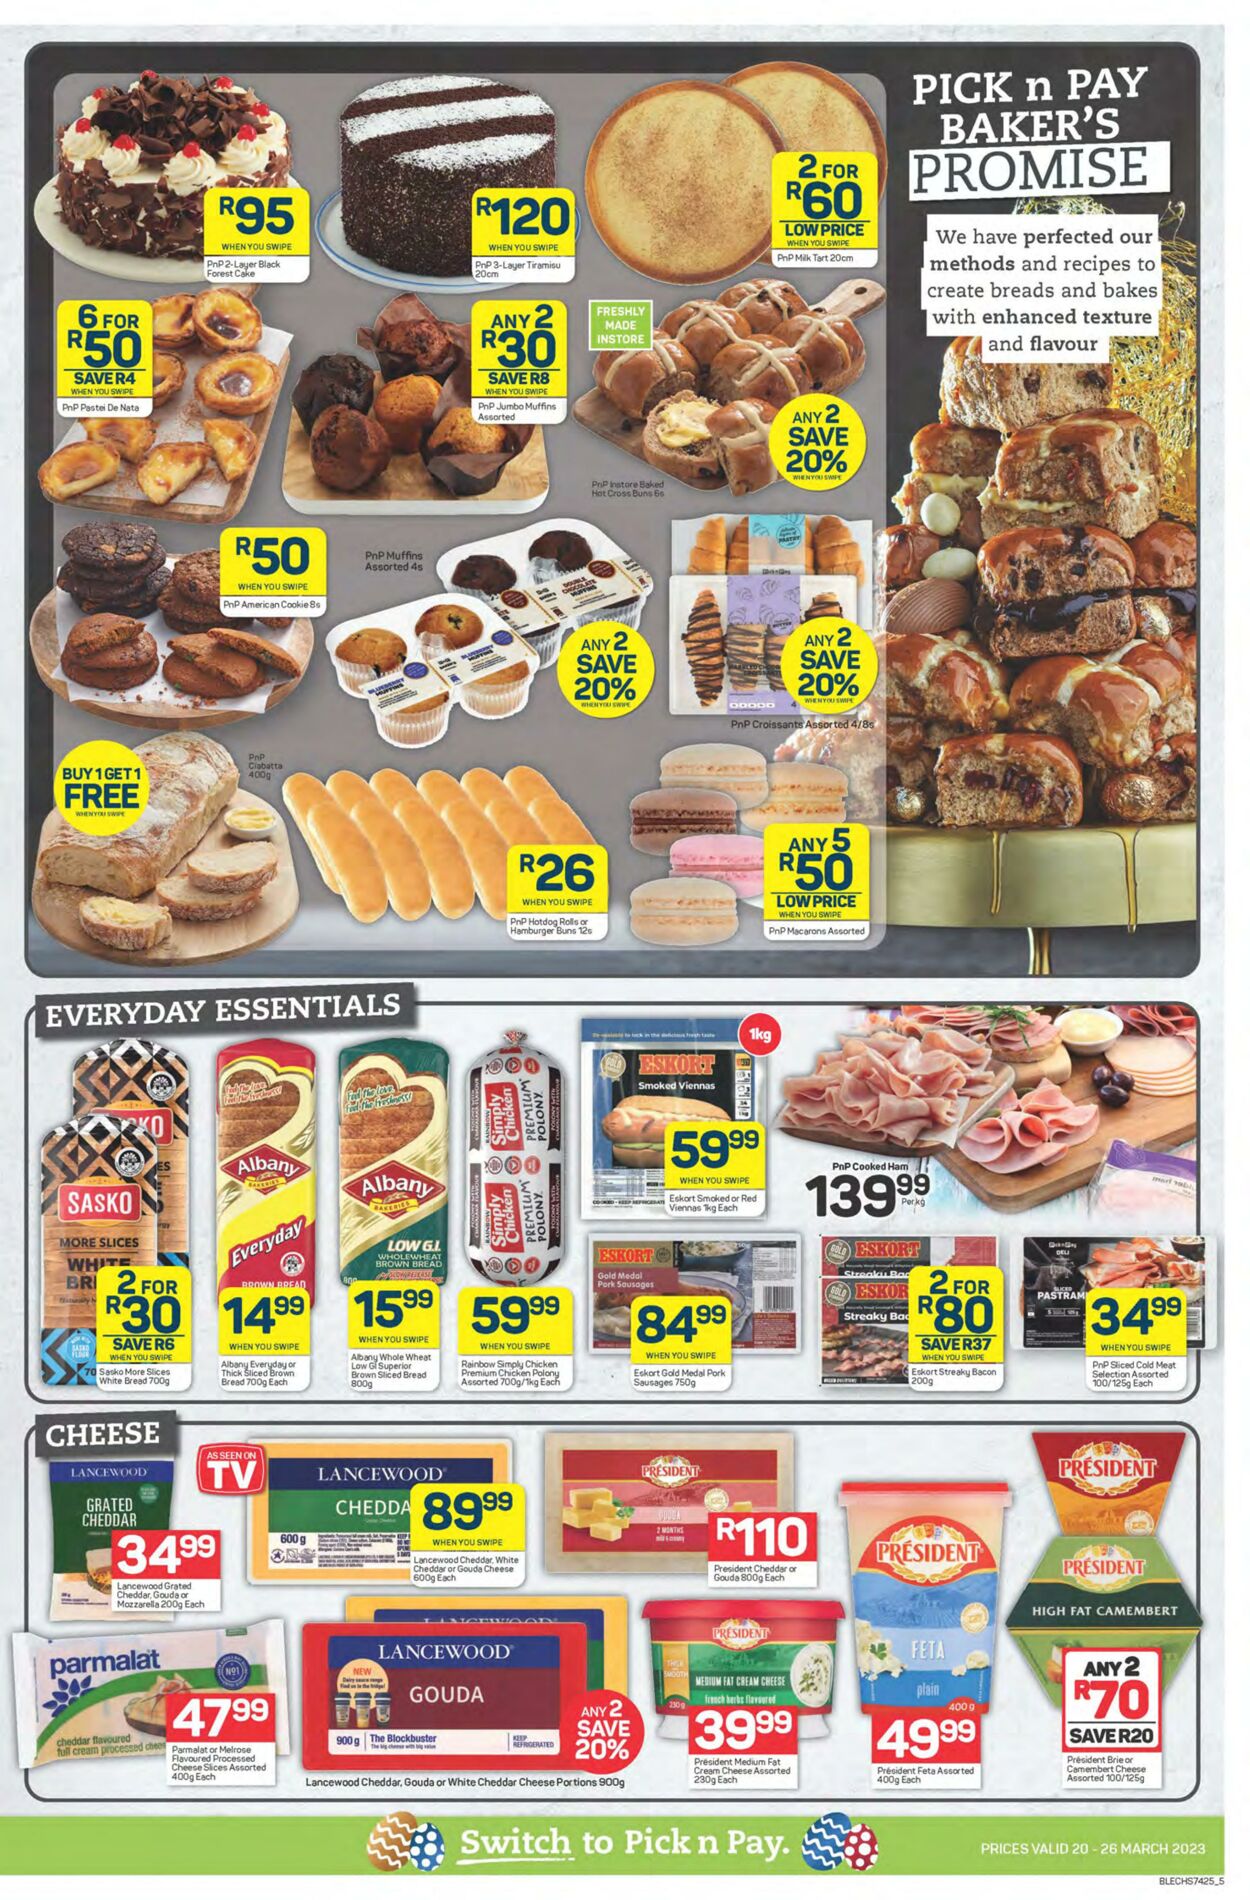 Special Pick n Pay 20.03.2023 - 26.03.2023